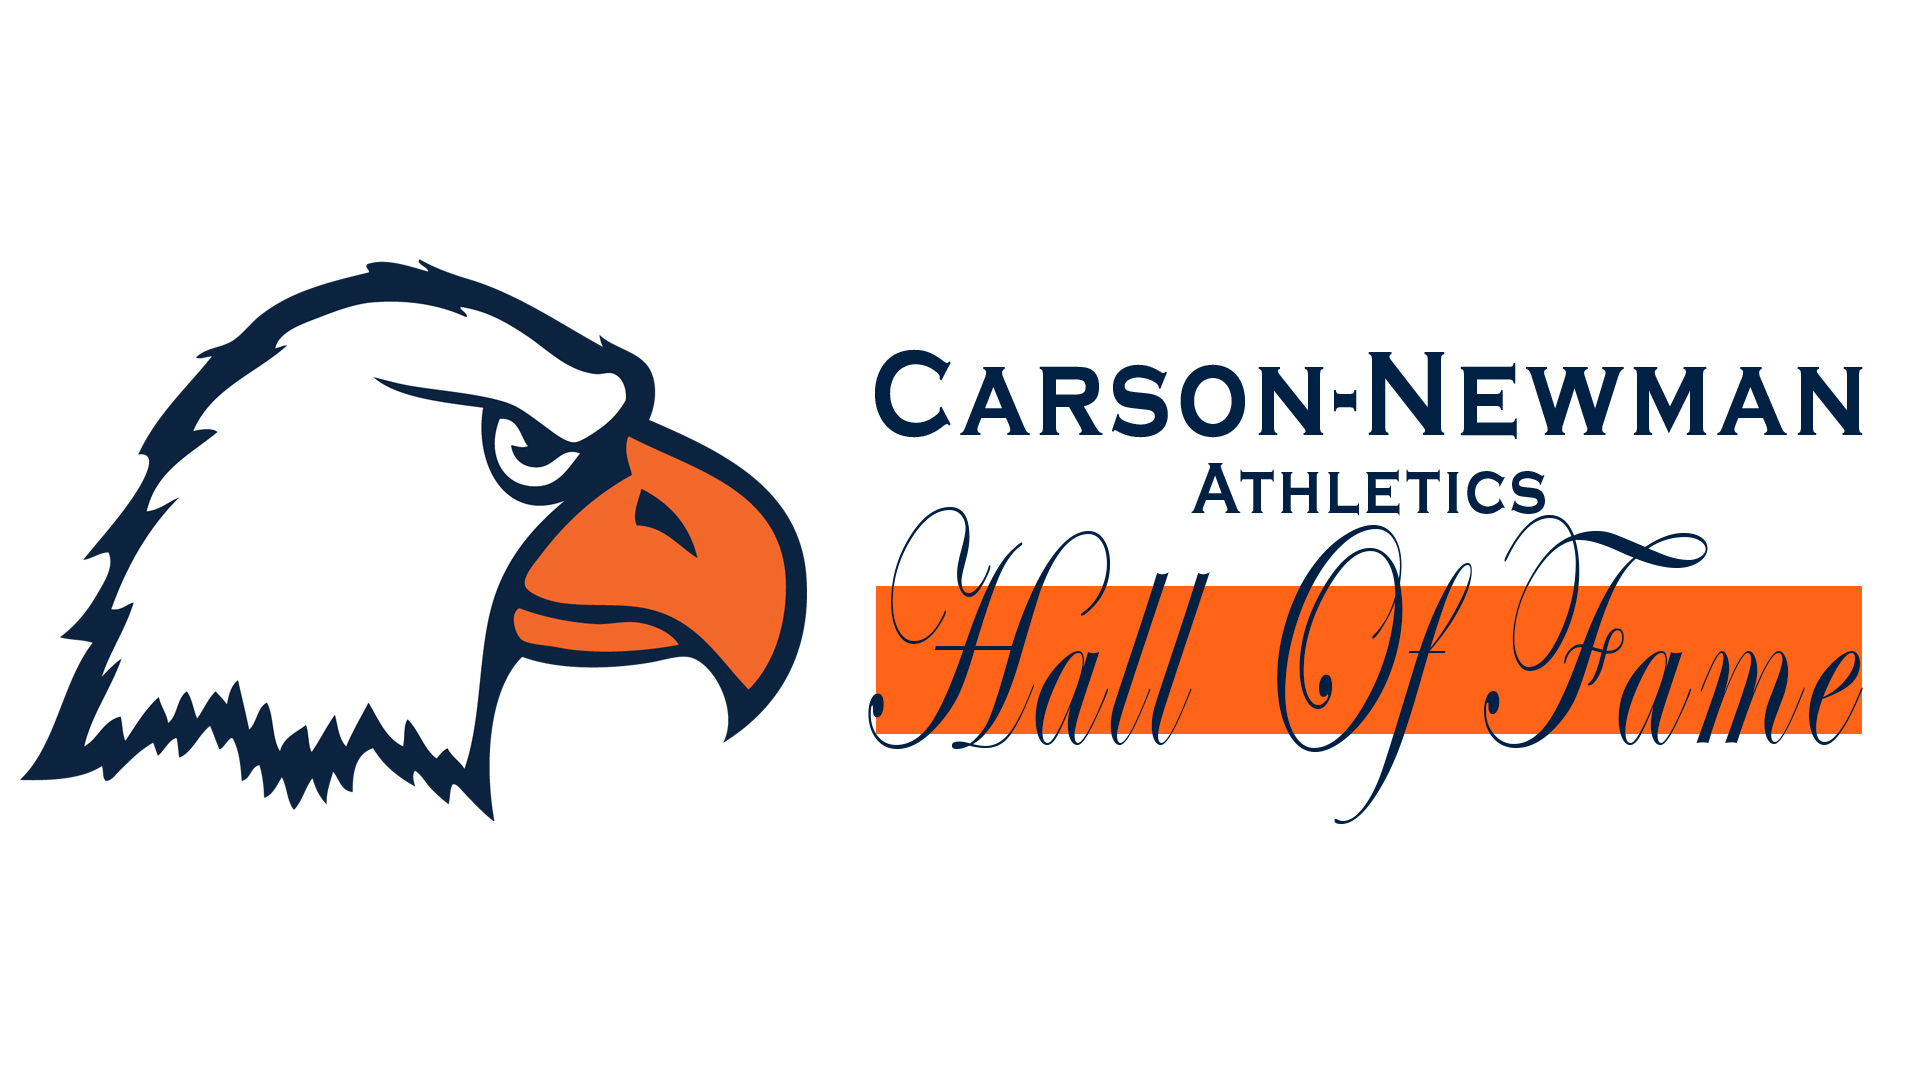 Ballot released for 2022 Carson-Newman Athletics Hall of Fame class